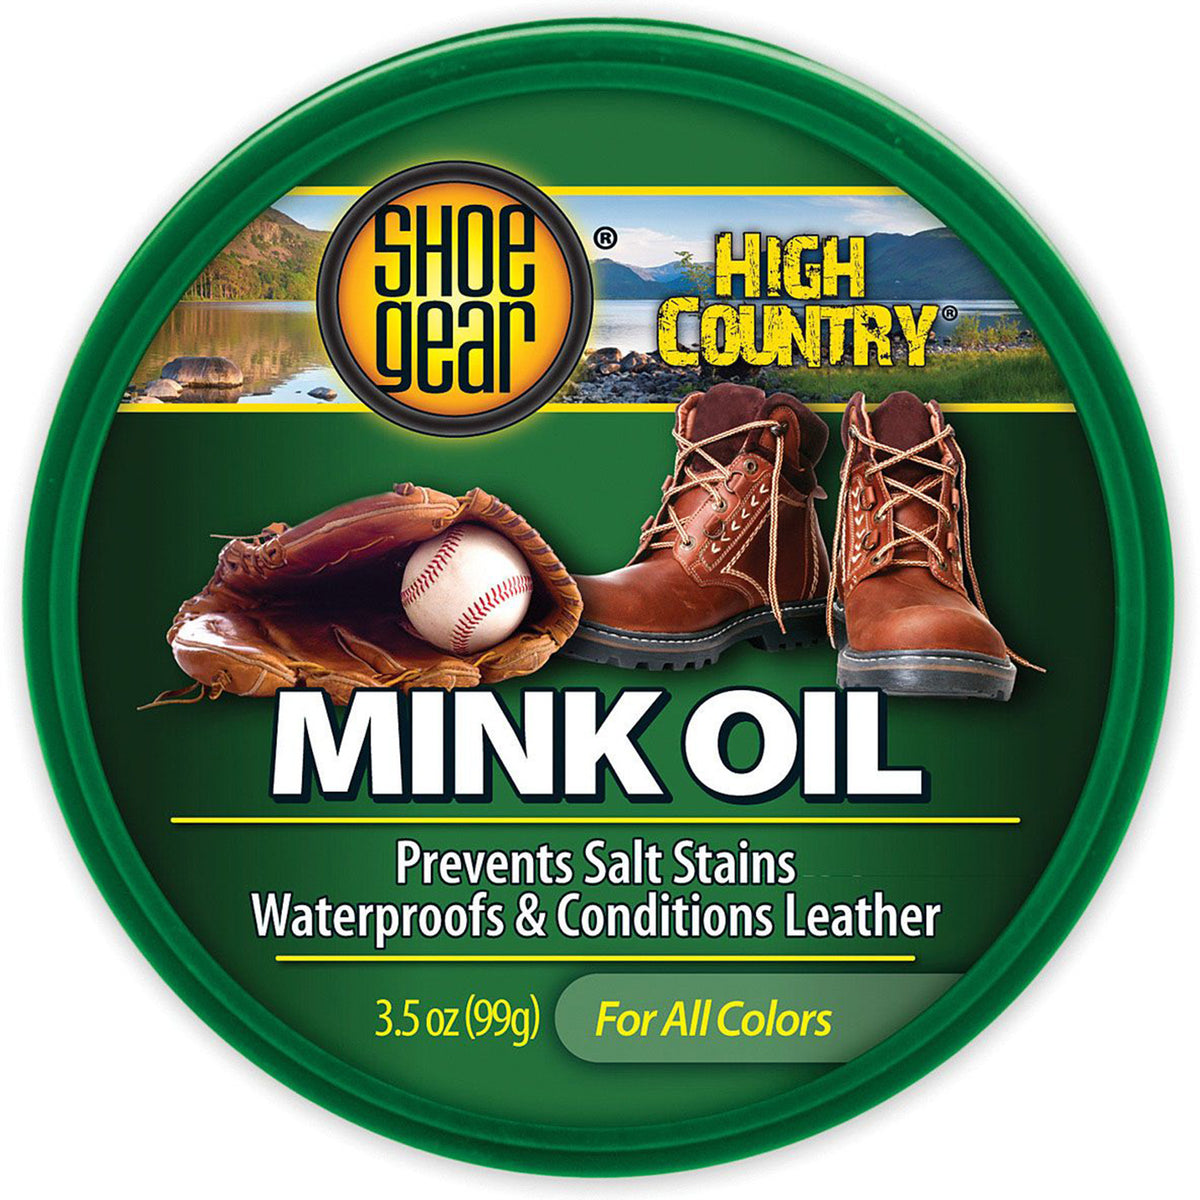 the front of the package of mink oil